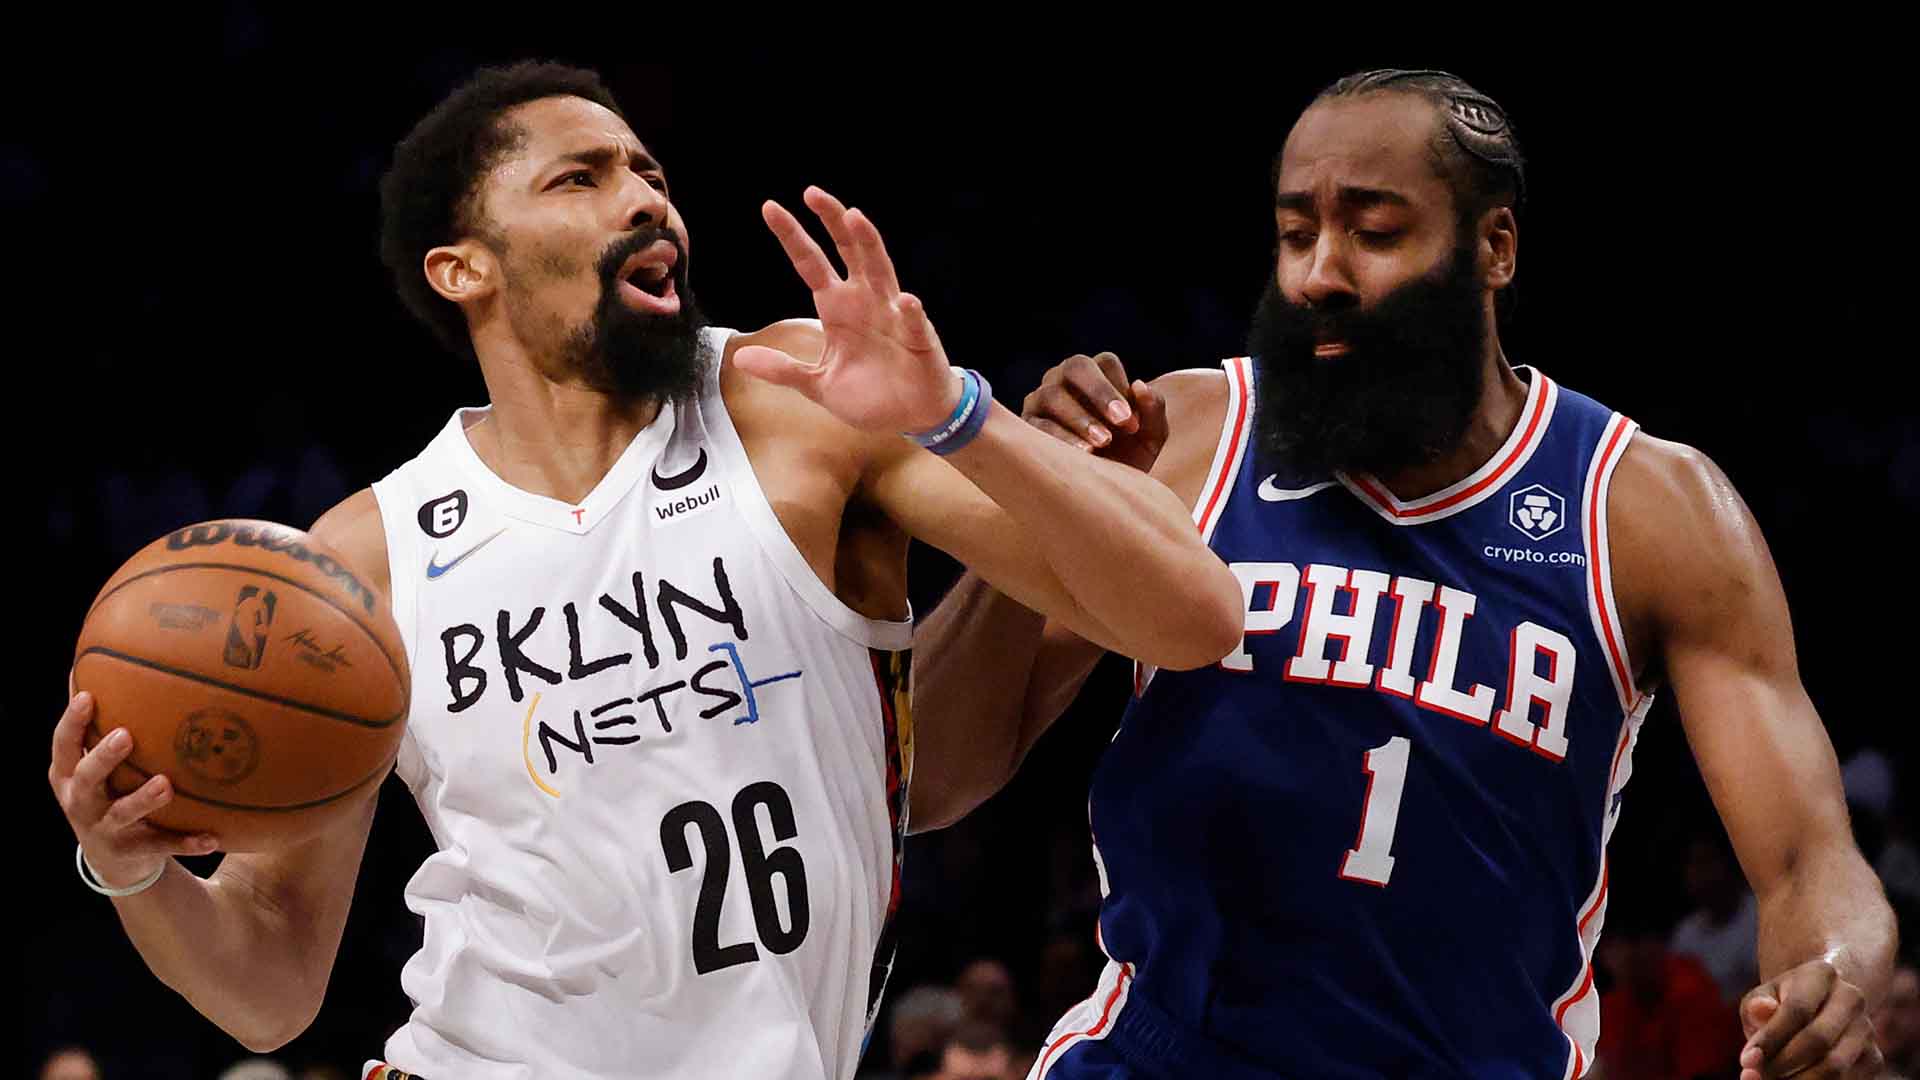 Series previews: What to expect in 1st round of 2023 NBA Playoffs